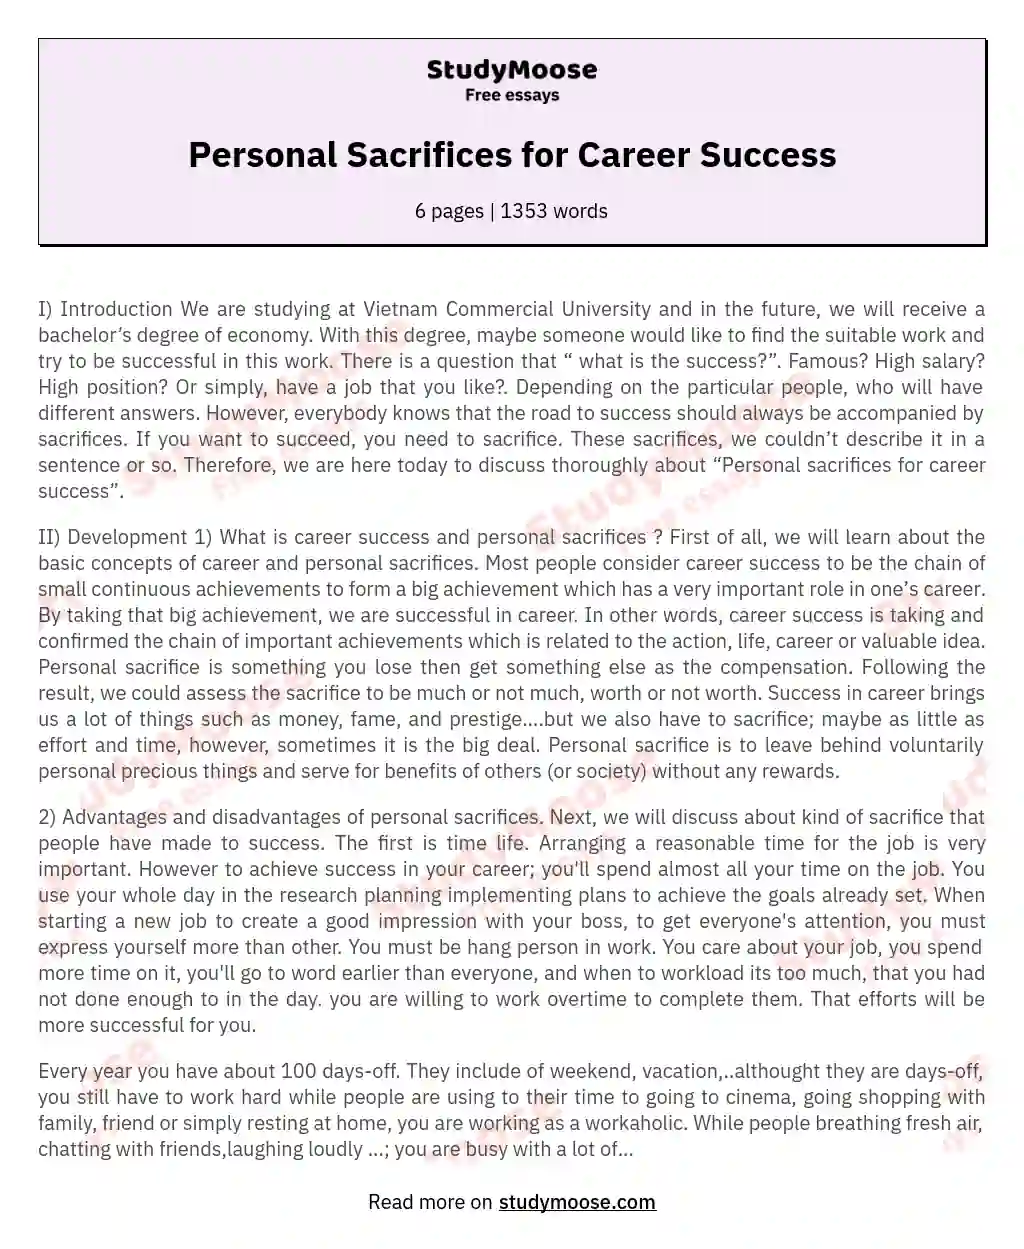 Personal Sacrifices for Career Success